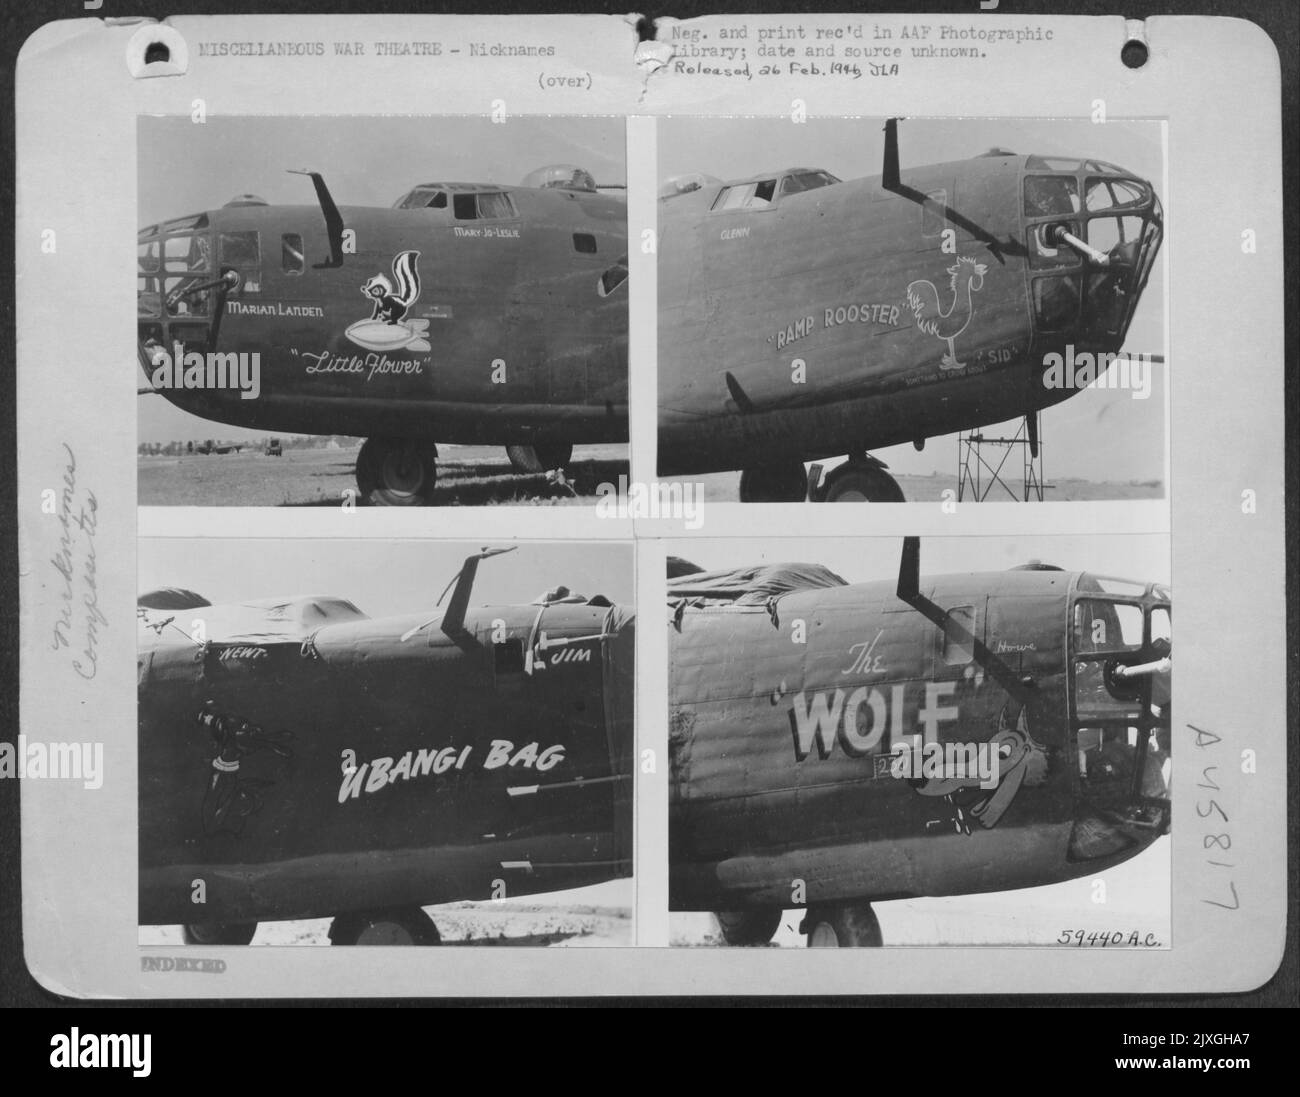 Composite Photo Of Nicknames On Consolidated B-24S. 'Little Flower', 'Ramp Rooster', 'Ubangi Bag', And 'The Wolf'. China-Burma-India. Stock Photo